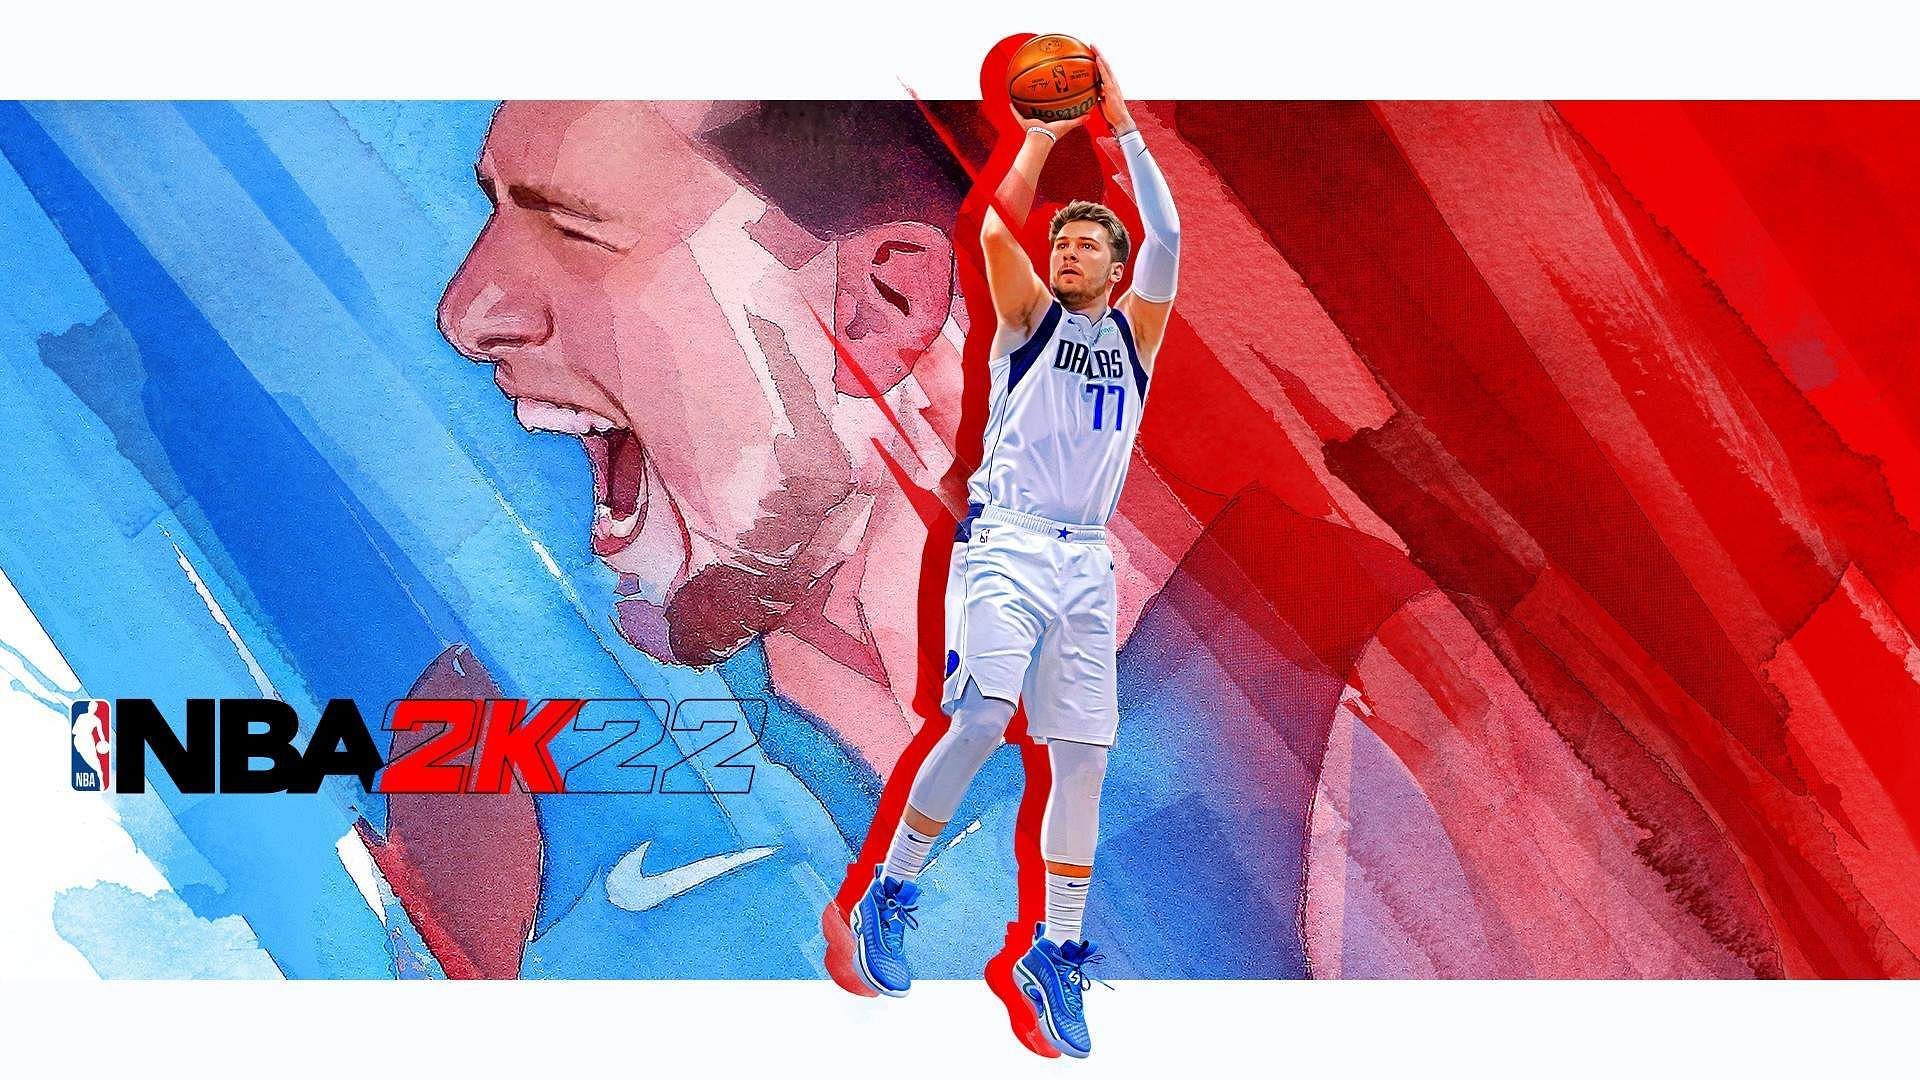 Download Nba 2K22 wallpapers for mobile phone, free Nba 2K22 HD pictures